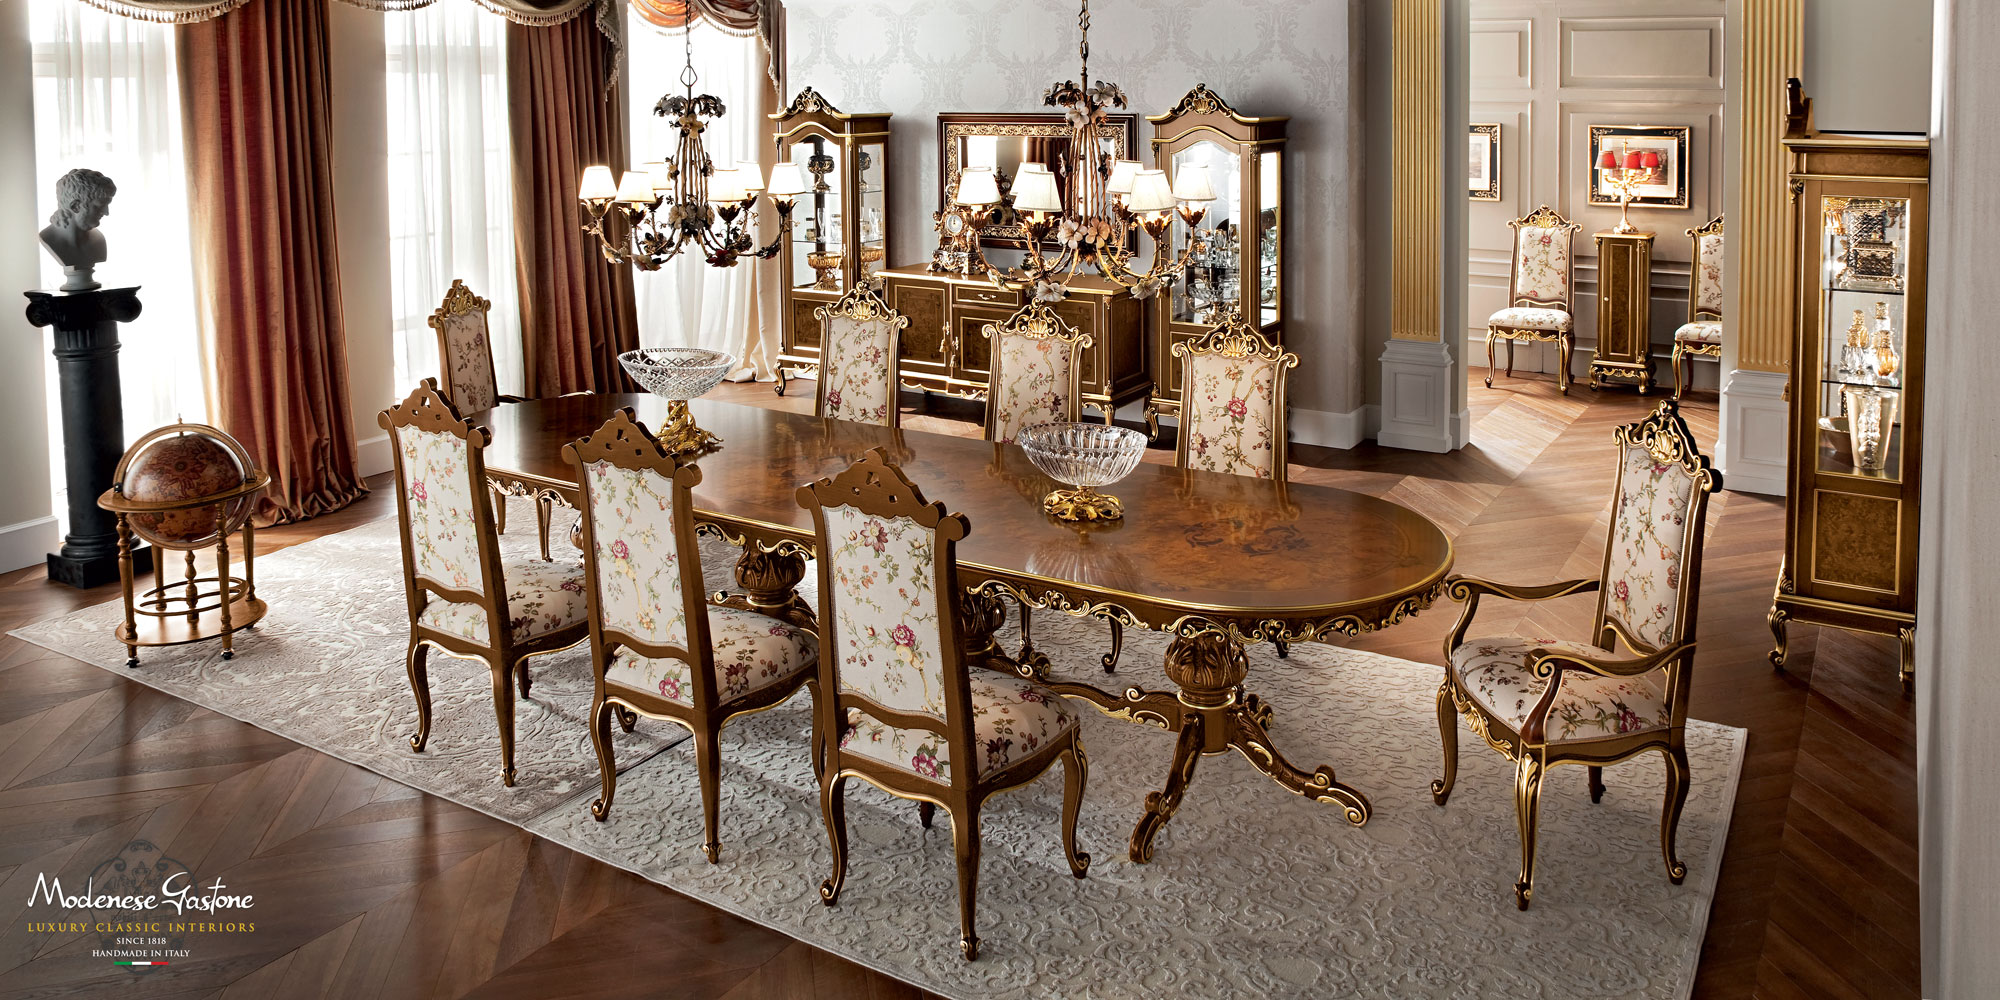 Dining-room-furnishing-ideas-inlaid-one-piece-table-Casanova-collection-Modenese-Gastone